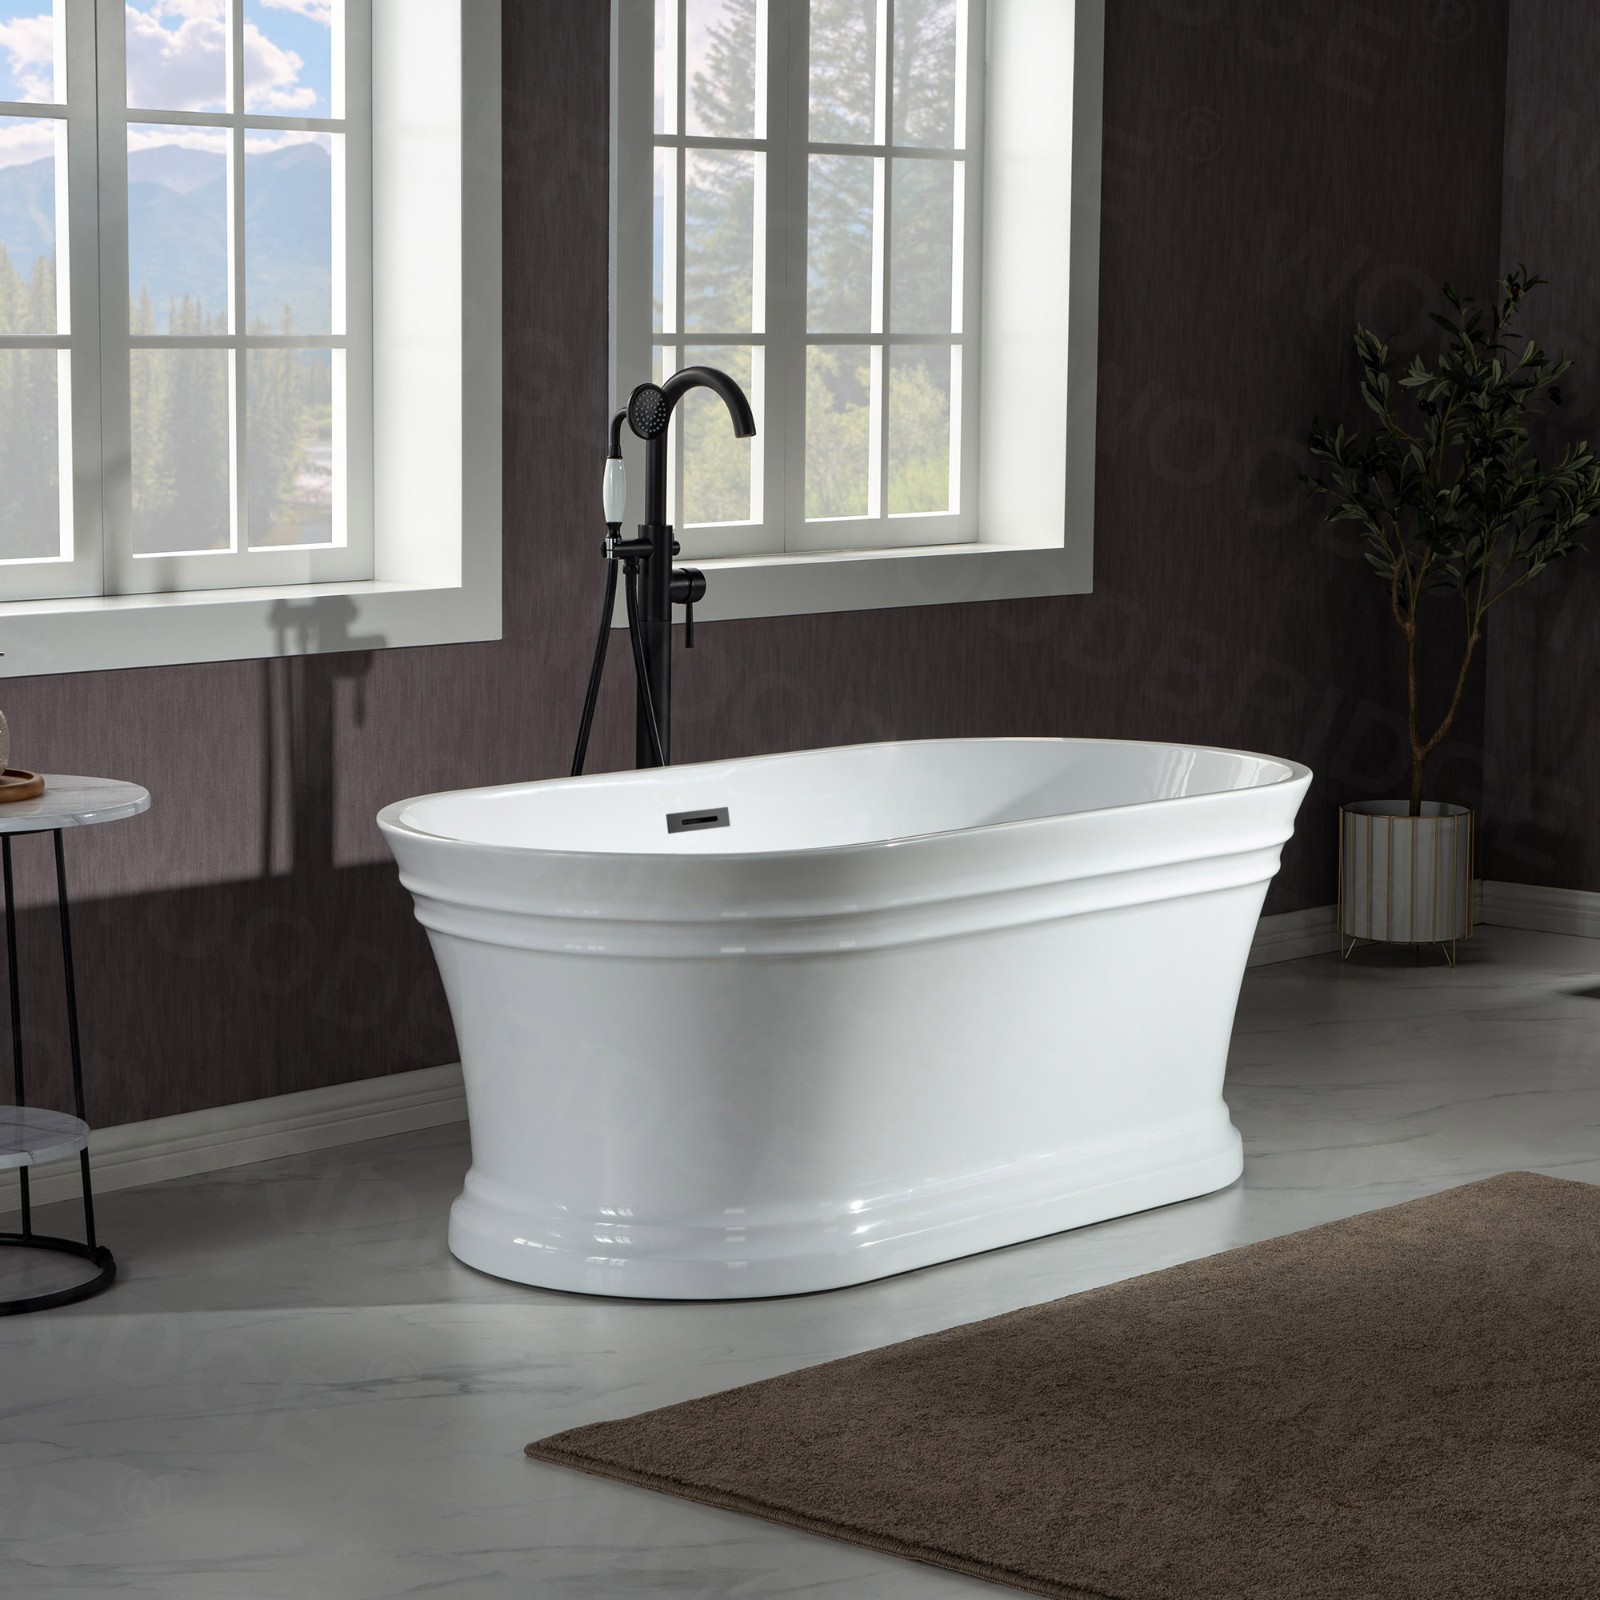  WOODBRIDGE 67 in. Freestanding Double Ended Acrylic Soaking Bathtub with Center Drain Assembly and Overflow, BTA1537/B1537, Glossy White_7708